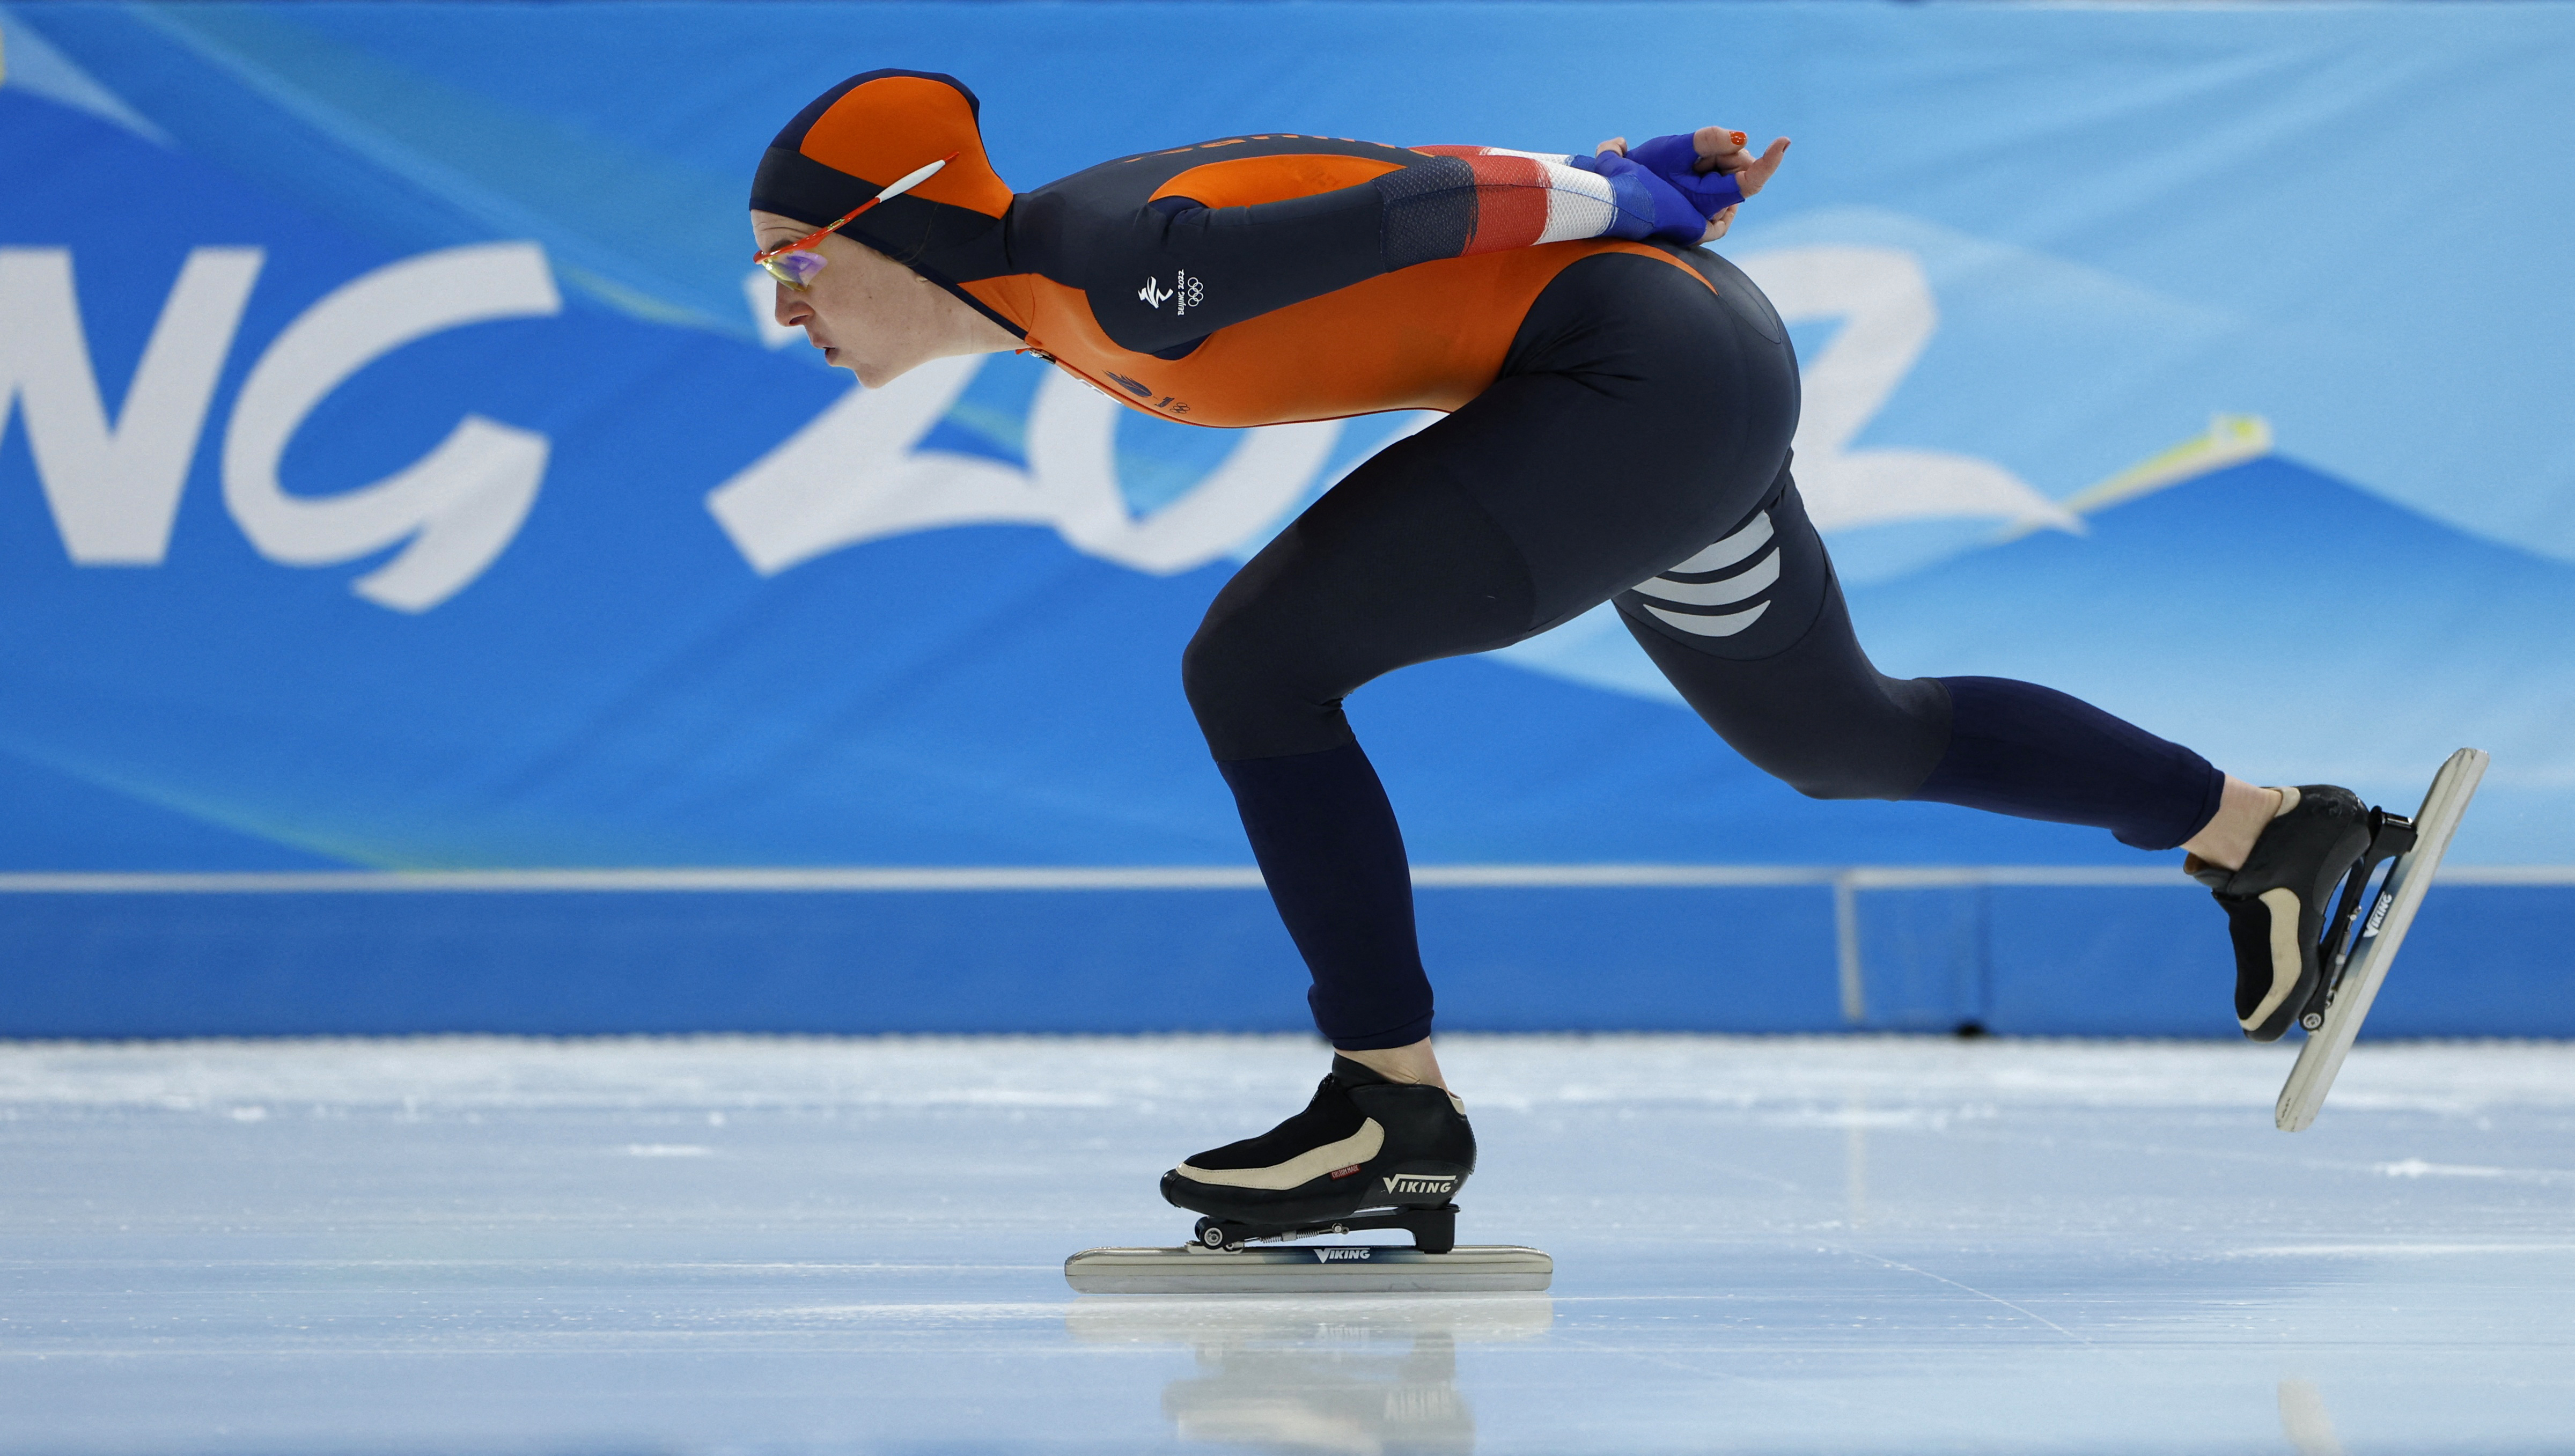 2022 Beijing Olympics - Speed Skating - Women's 1500m - National Speed Skating Oval, Beijing, China - February 7, 2022. Ireen Wust of the Netherlands in action. REUTERS/Susana Vera